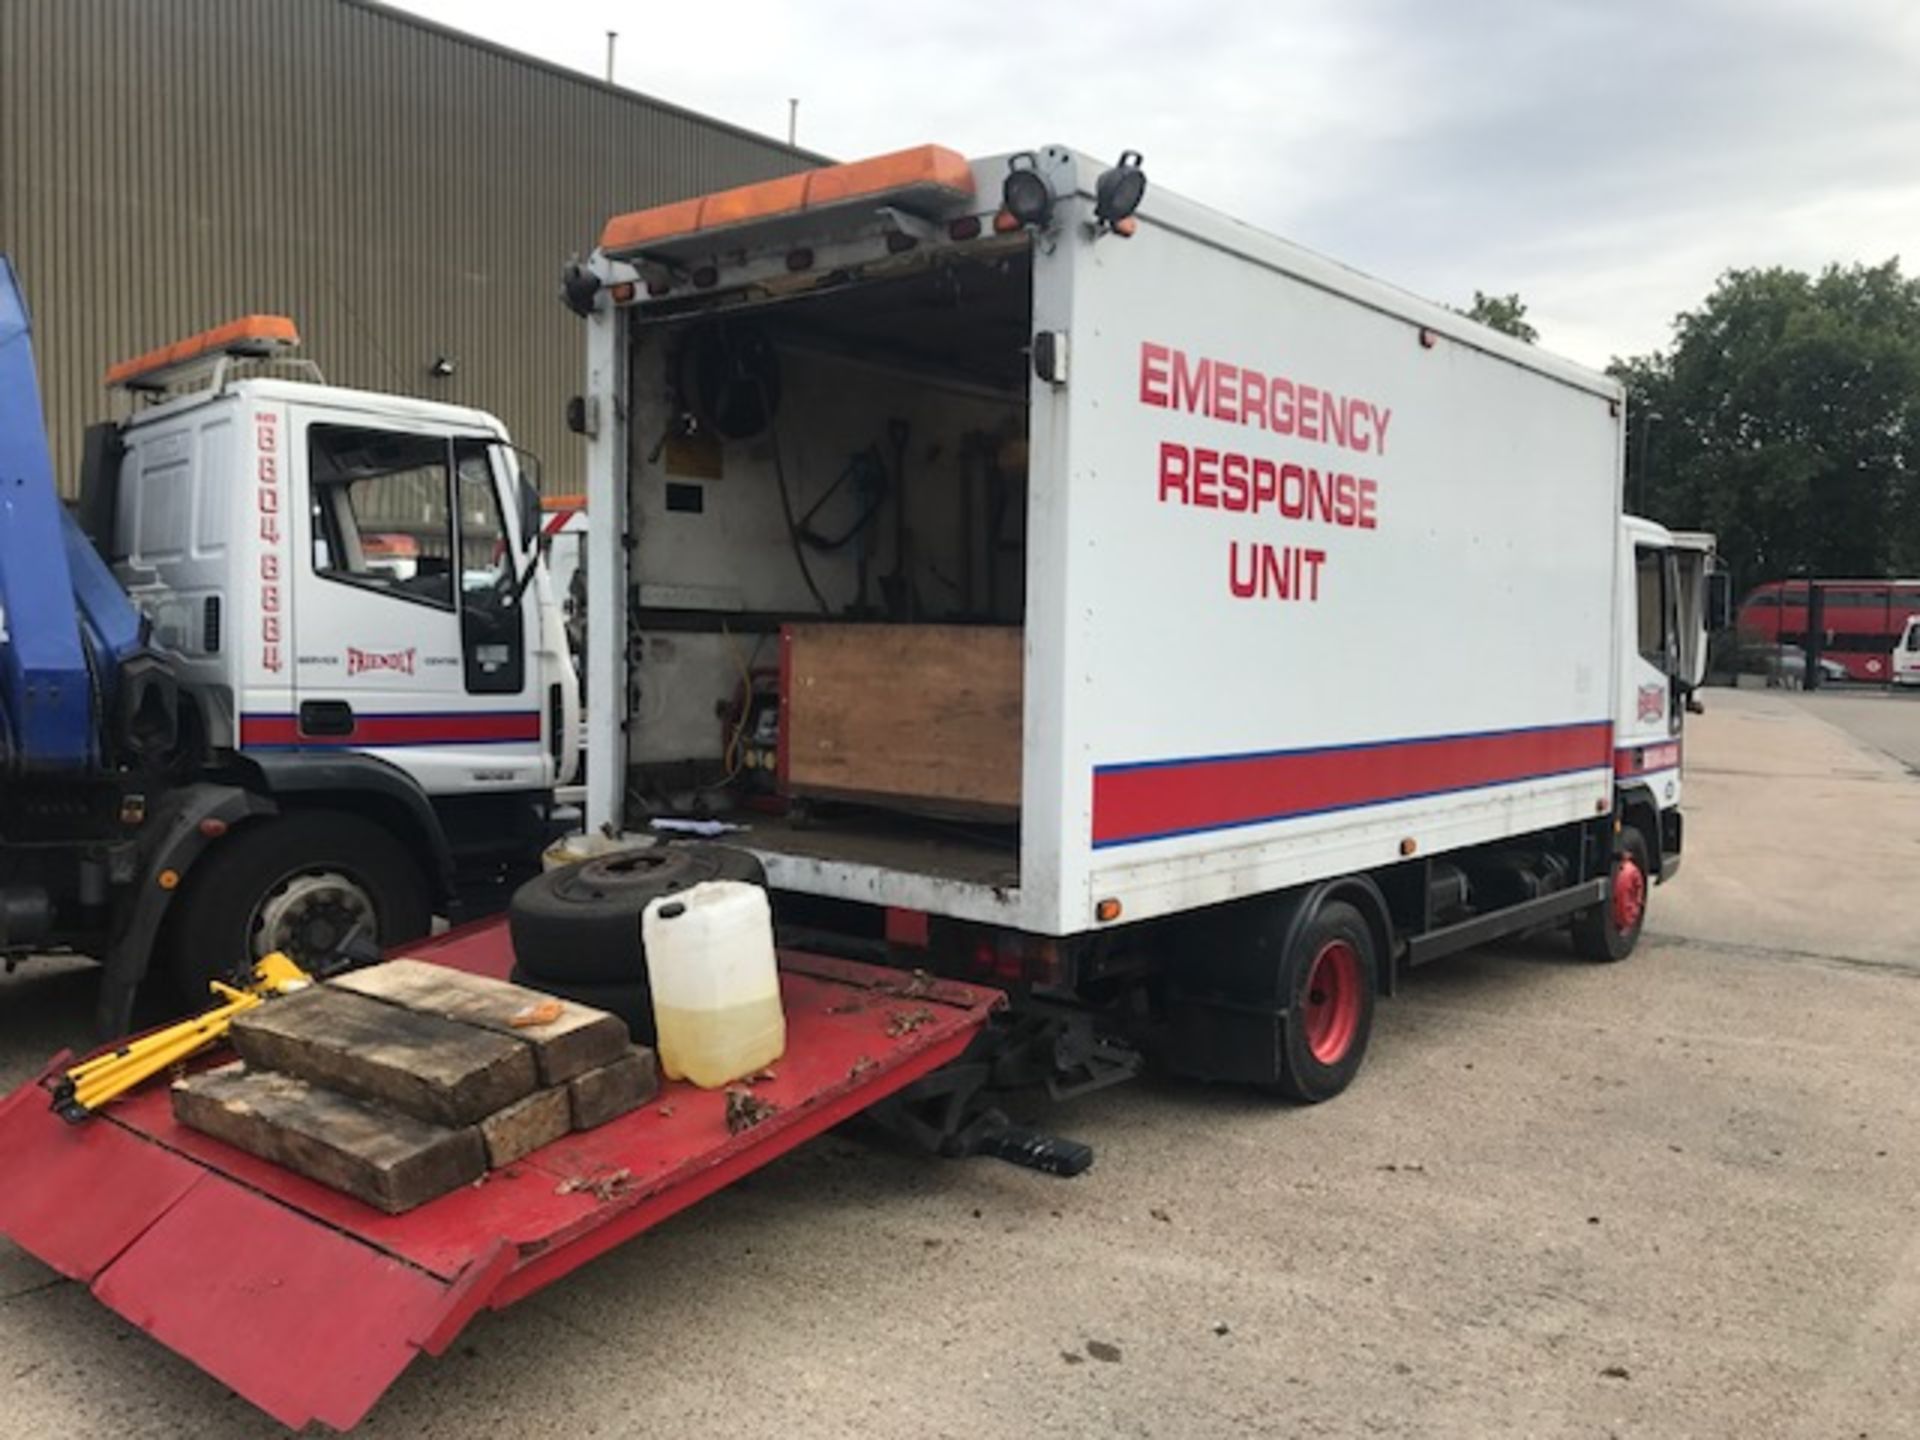 2002 Iveco Tertor 75E17 7.4T Emergency Response rollover unit complete with tail lift and - Image 5 of 26